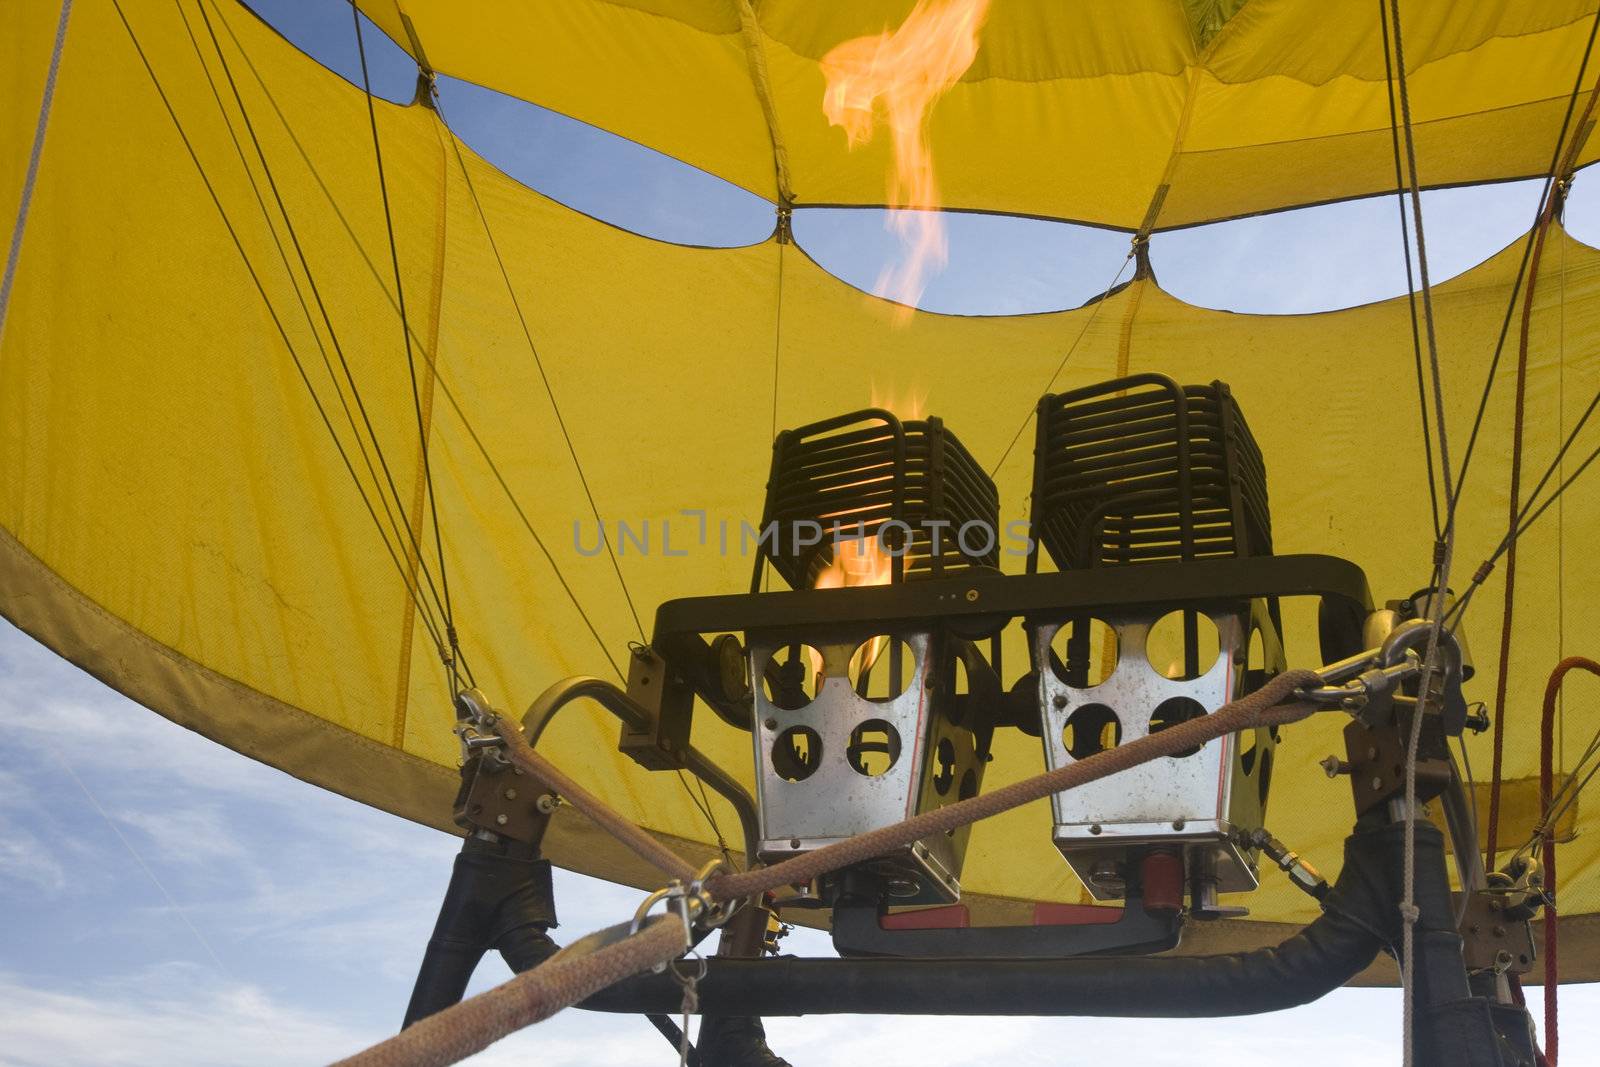 propane gas burners and flame inside a yellow hot air balloon being inflated